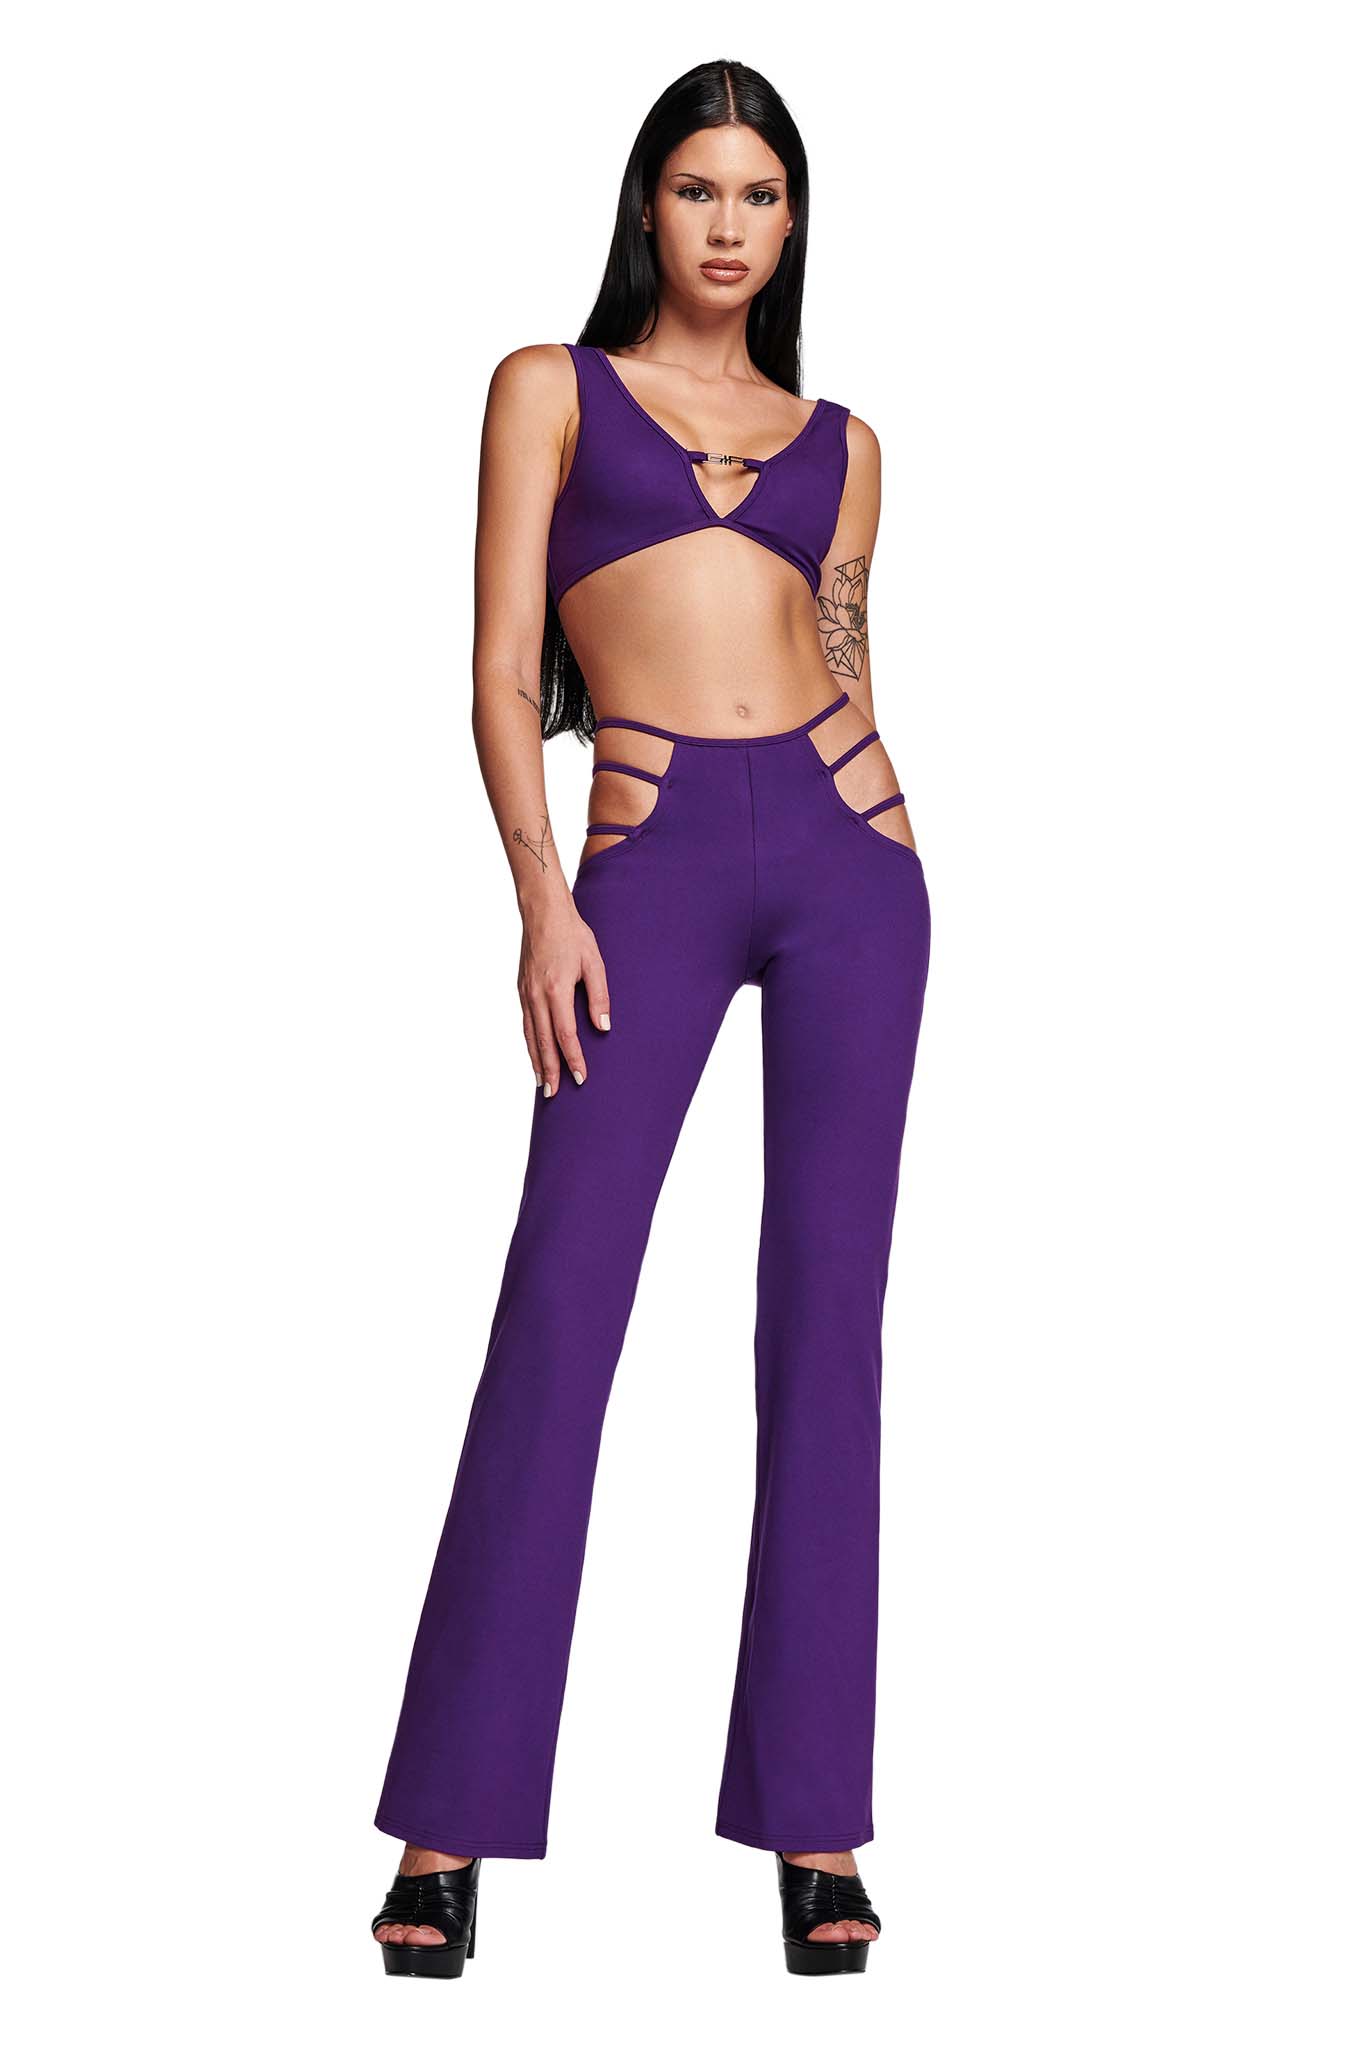 Maddy's purple crop top and pants set on Euphoria